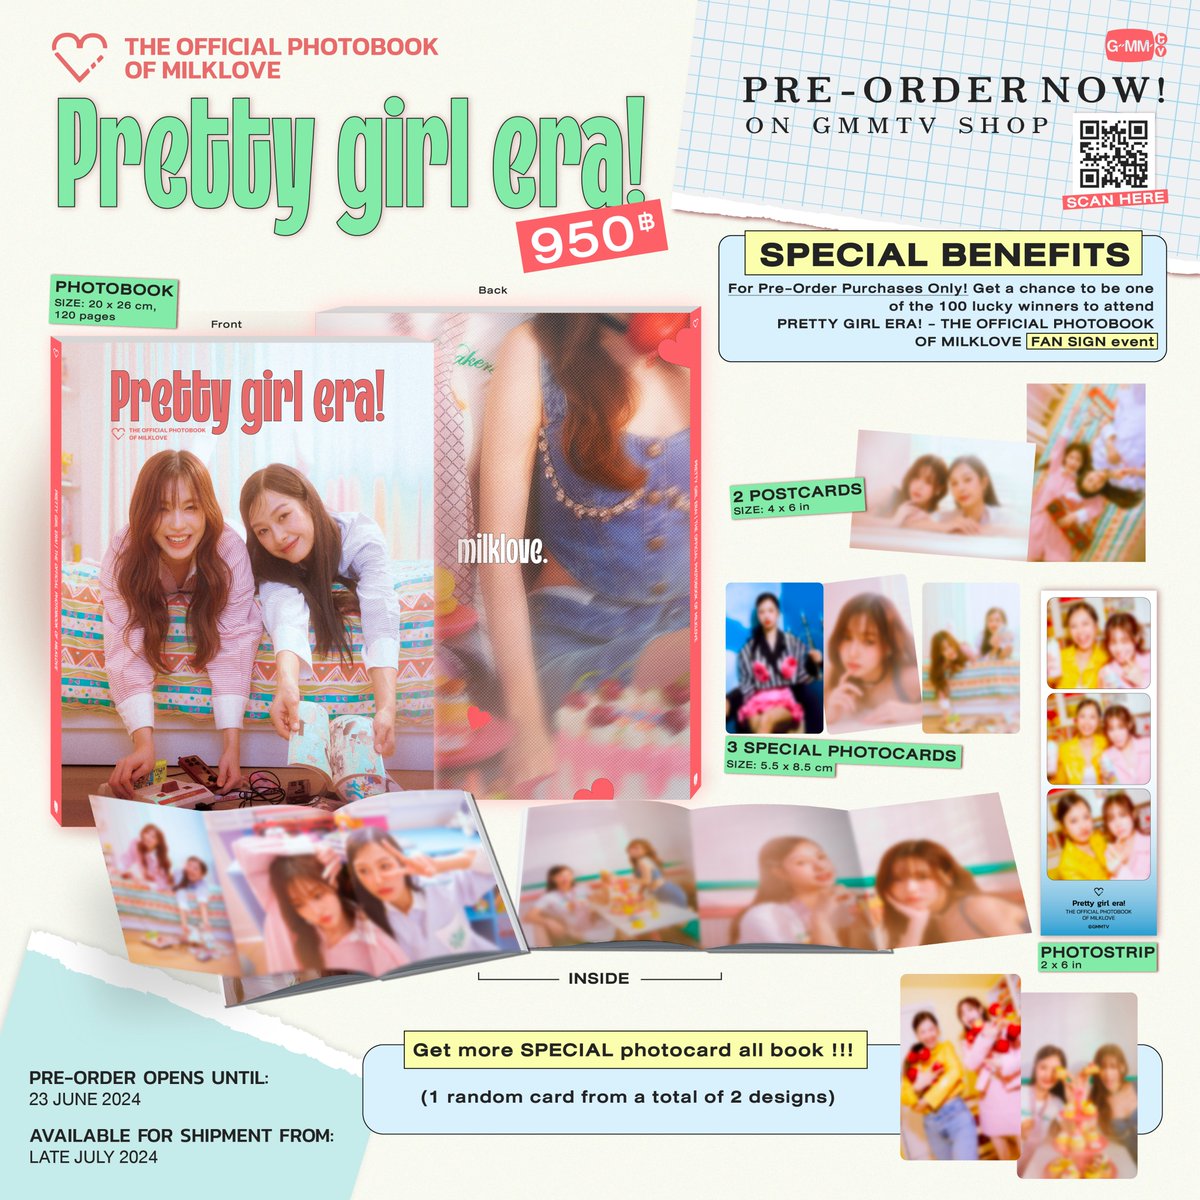 PRE-ORDER NOW! PRETTY GIRL ERA | THE OFFICIAL PHOTOBOOK OF MILKLOVE ON GMMTV SHOP gmm-tv.com/shop/pretty-gi… #PRETTYGIRLERAxMILKLOVE #MilkLove #มิ้ลค์เลิฟ #23point5FinalEP #GMMTV